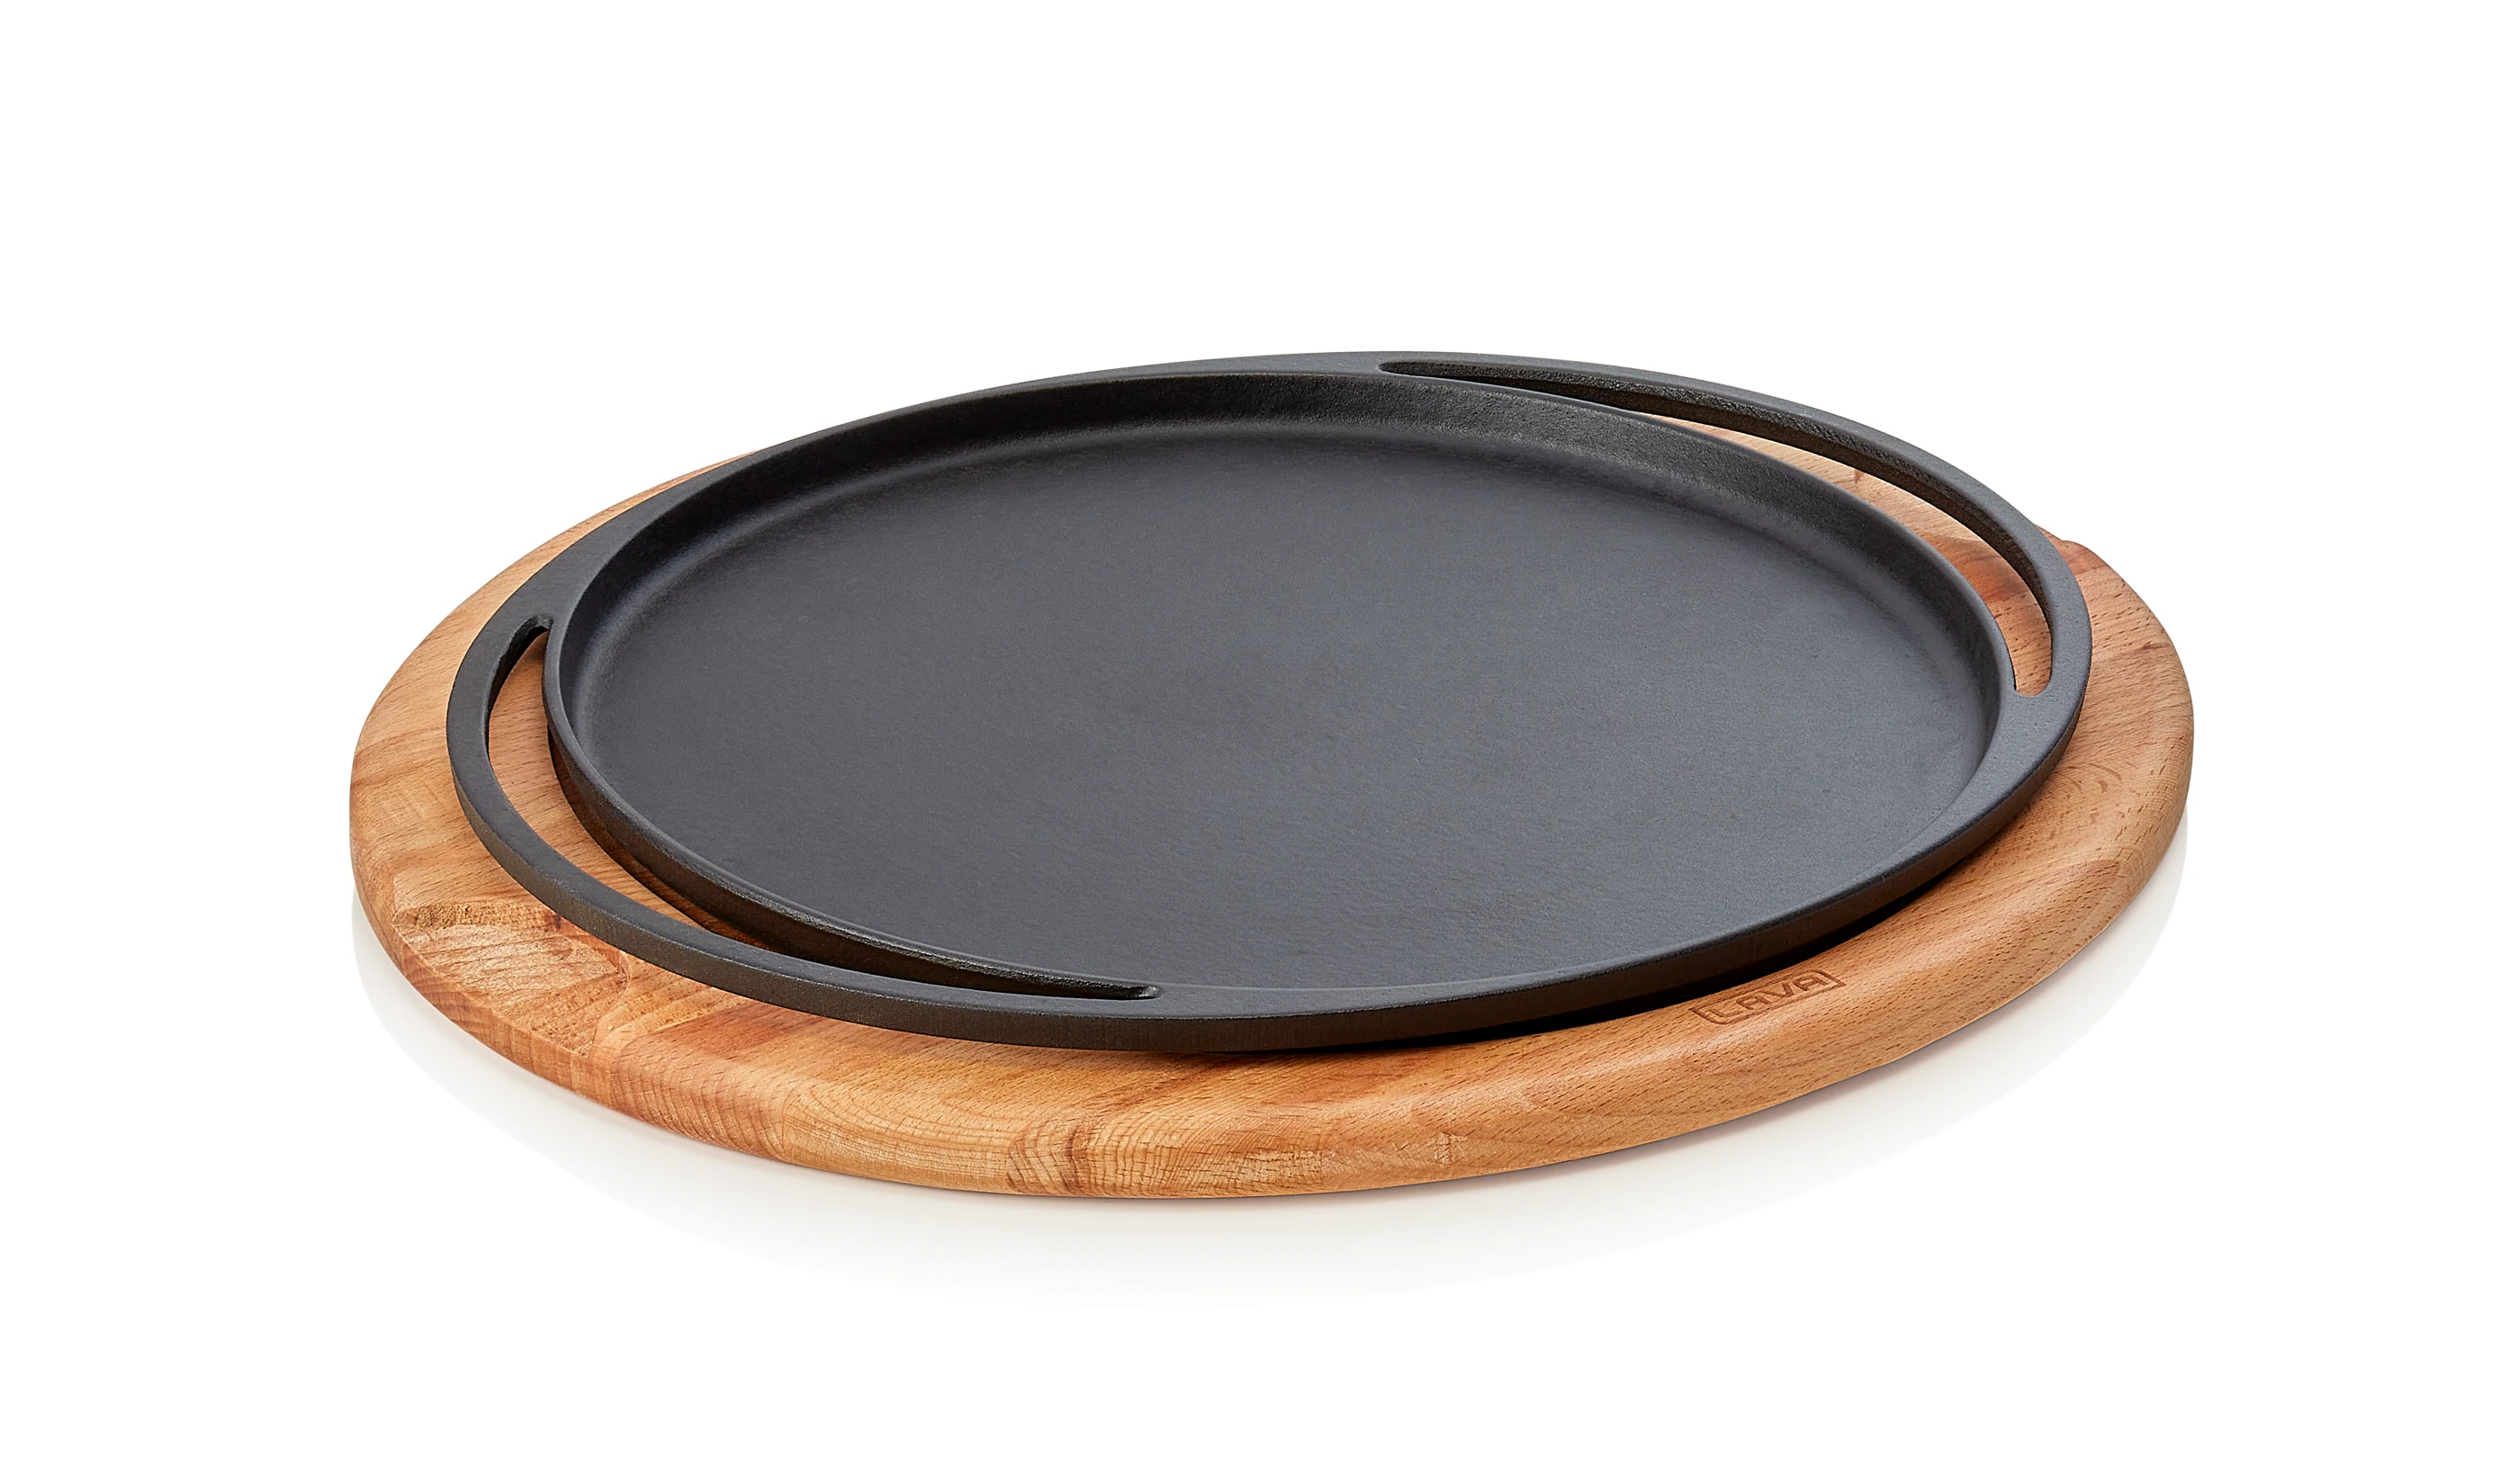 Frying/serving plate